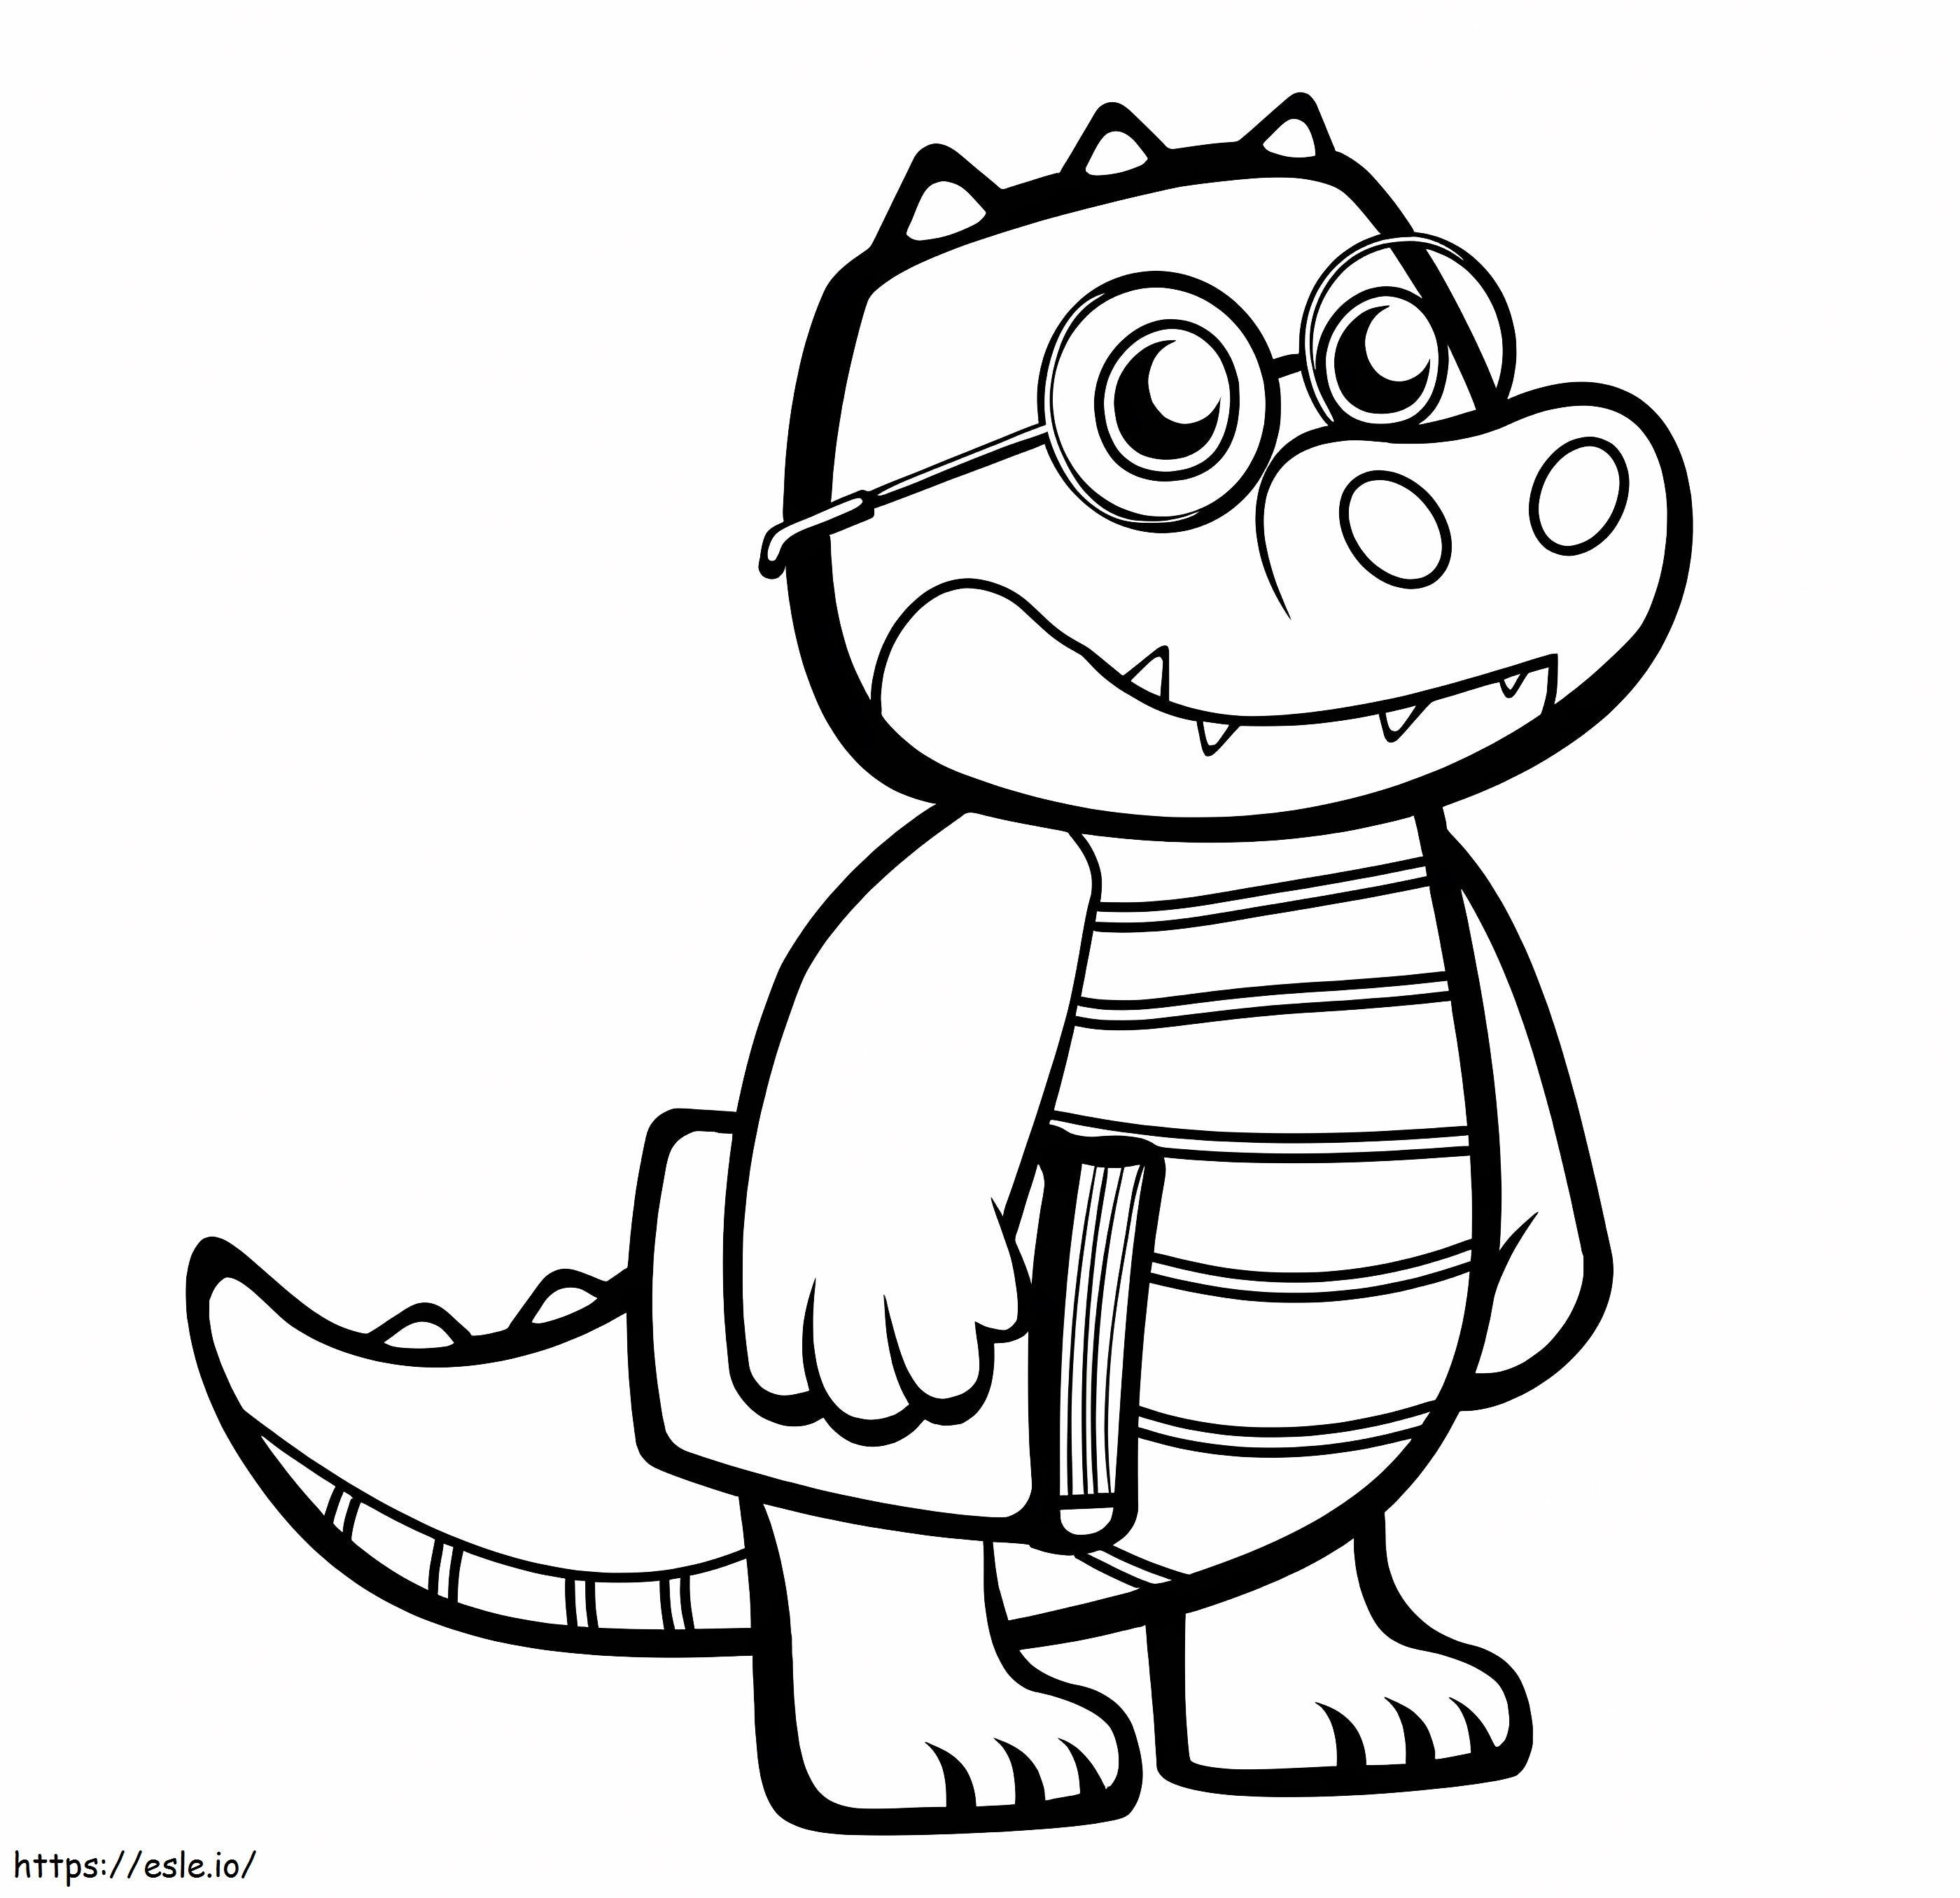 Student Crocodile coloring page